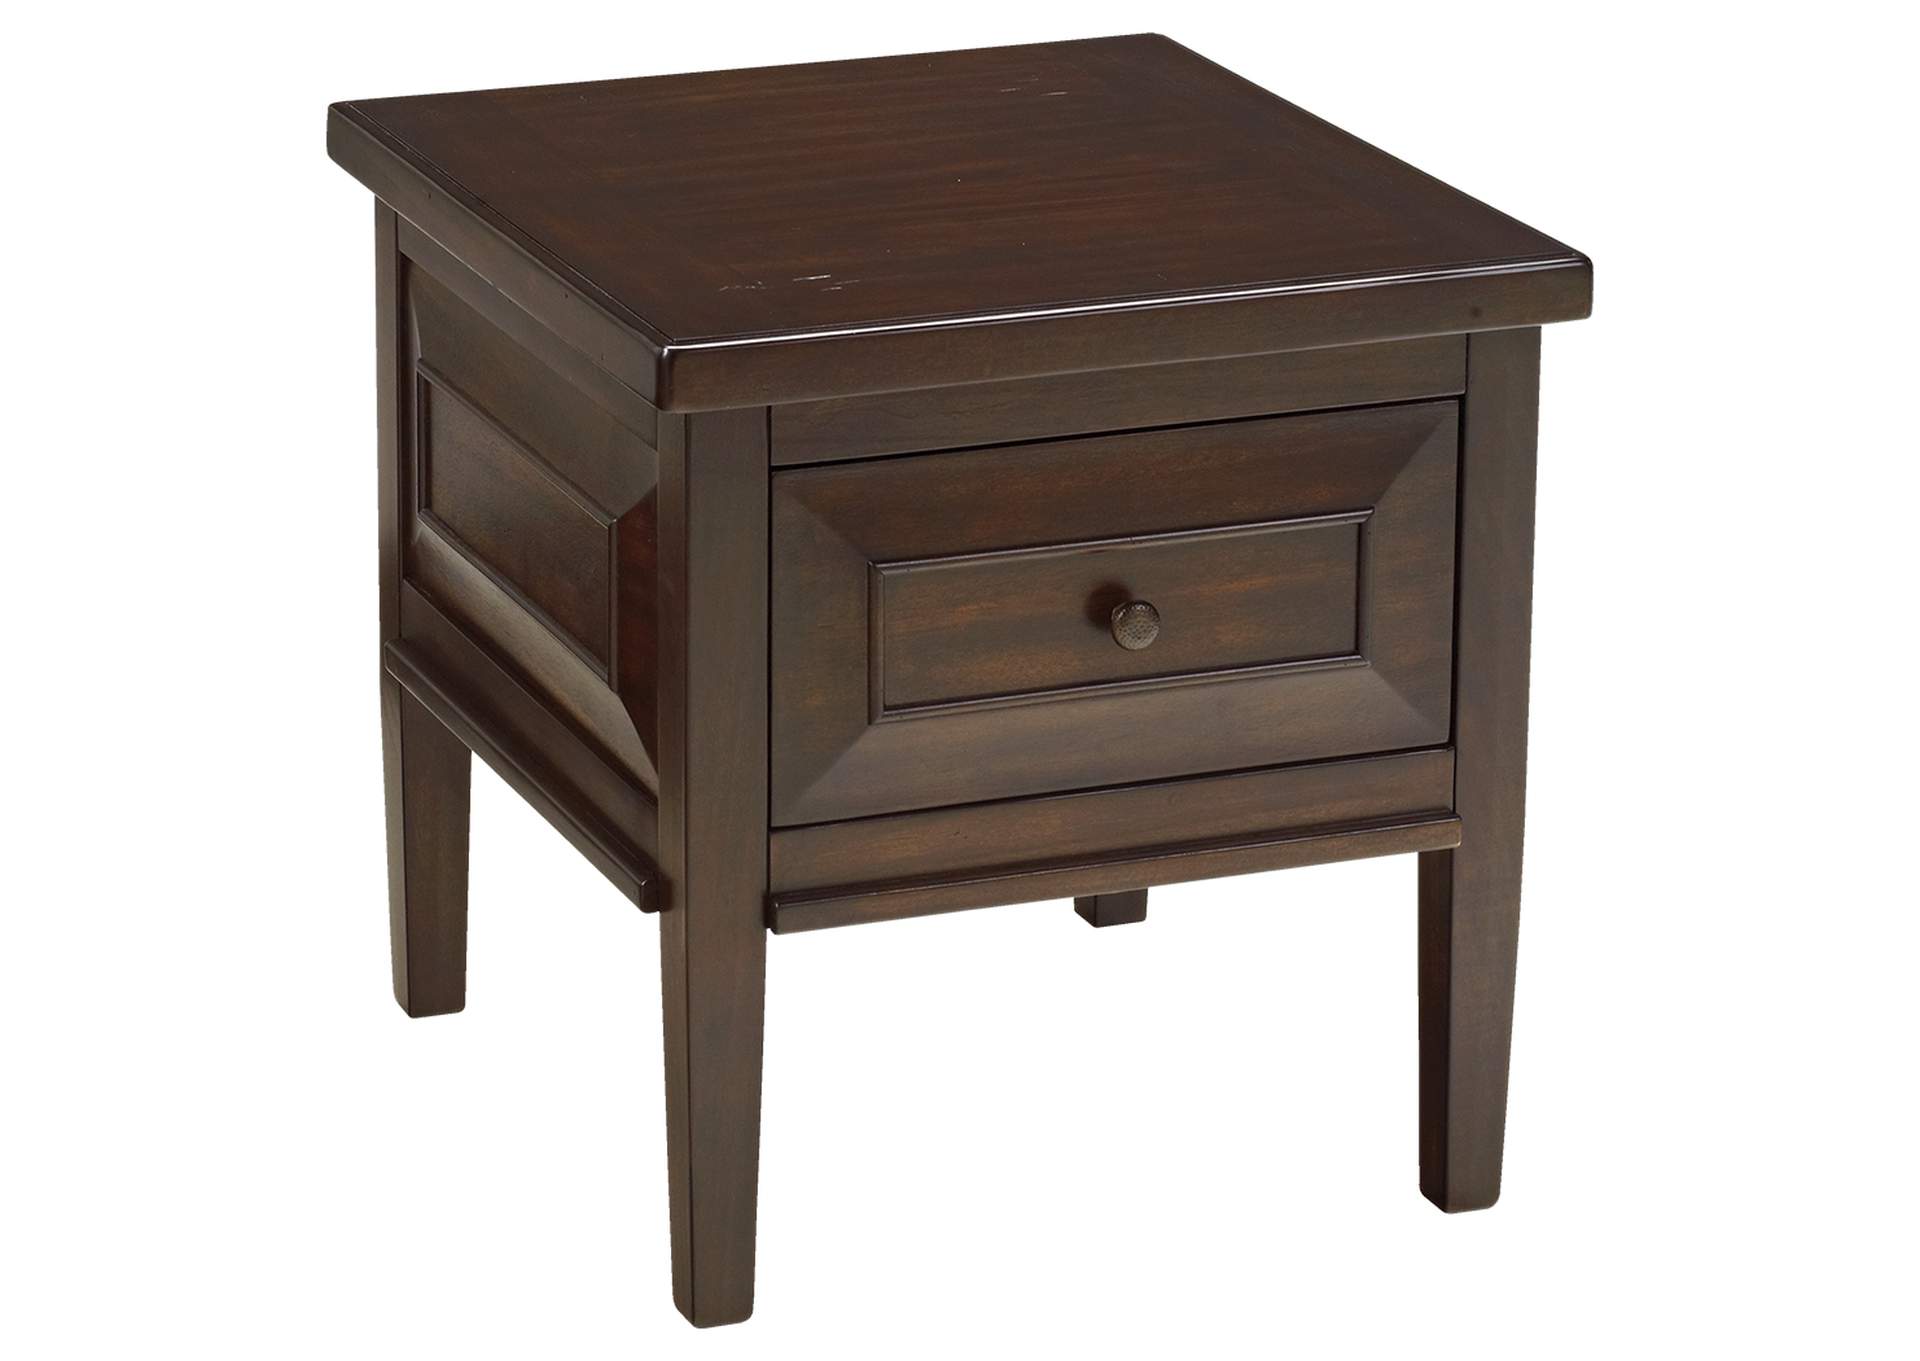 Hindell Park Square End Table,Signature Design By Ashley